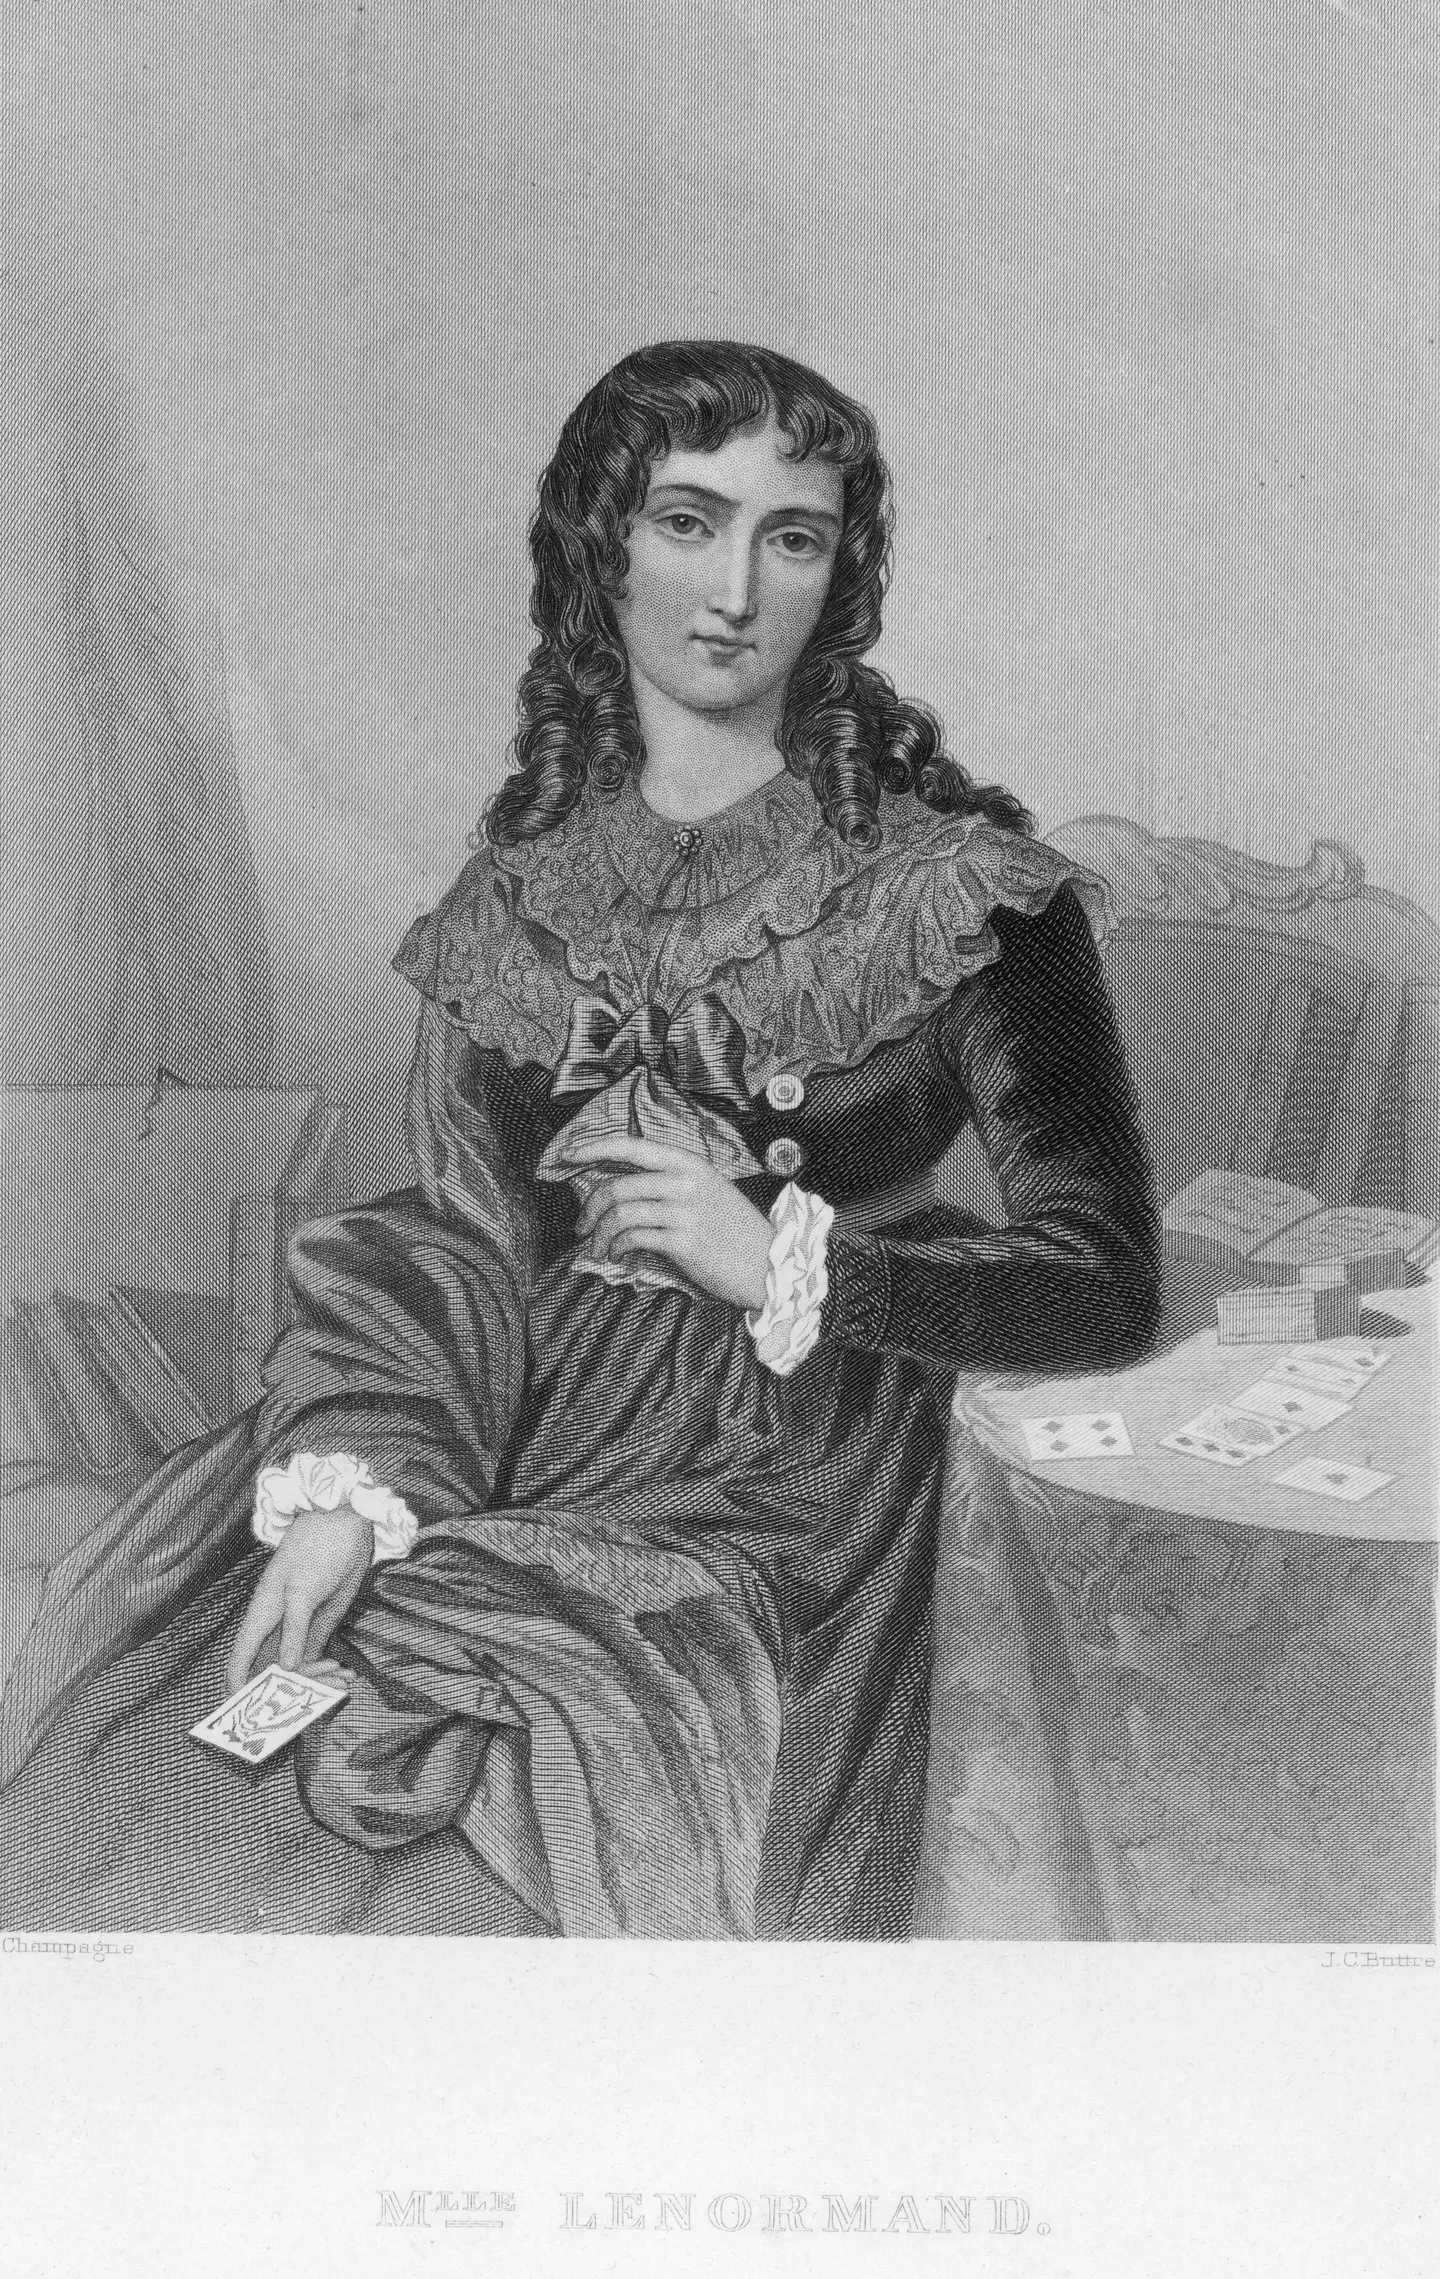 Marie-Anne-Adelaide Lenormand made predictions about Napoleon.